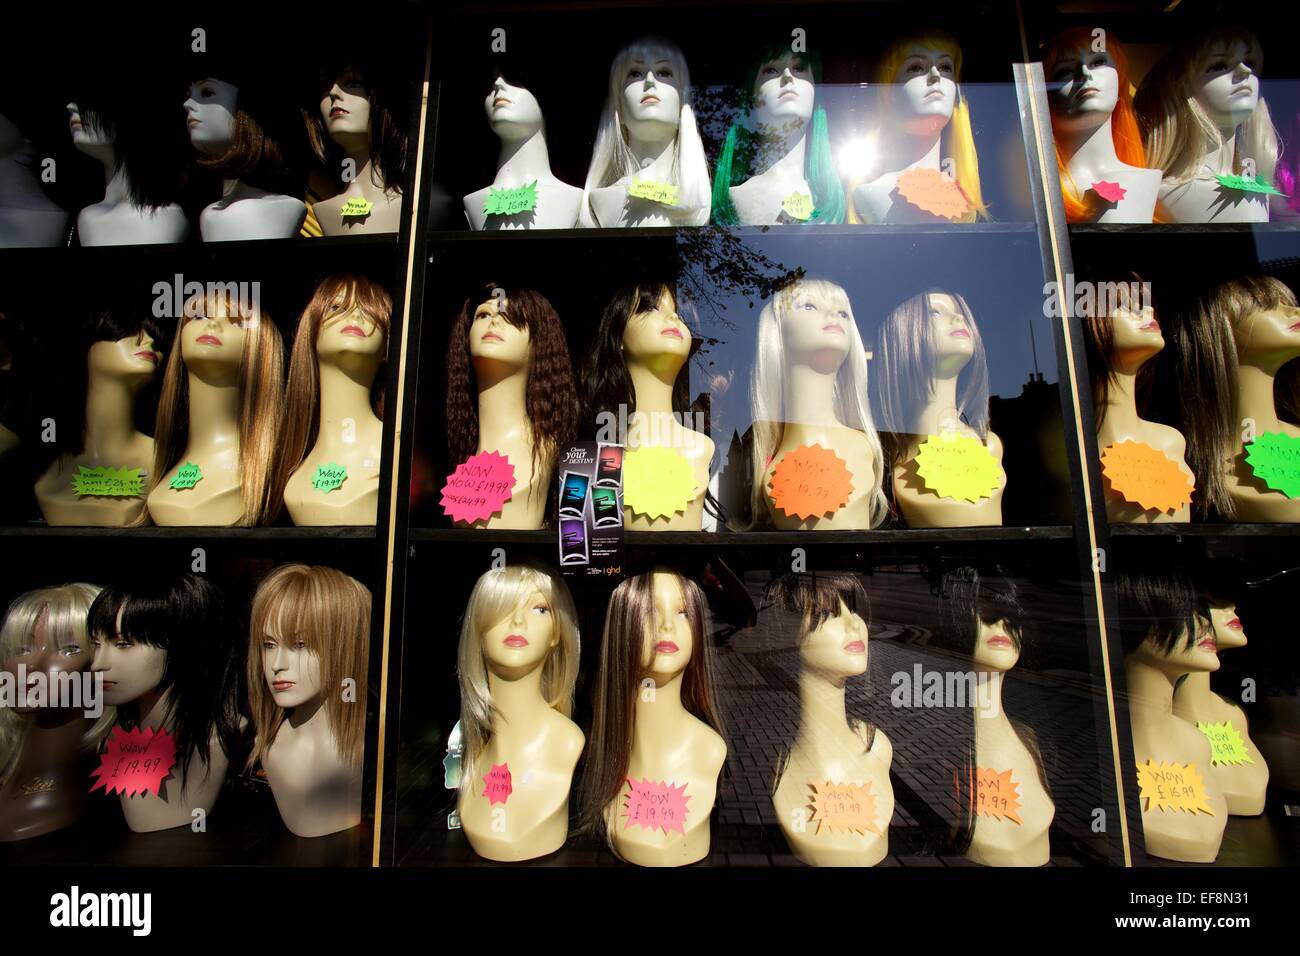 Shop window display of female mannequin heads Stock Photo